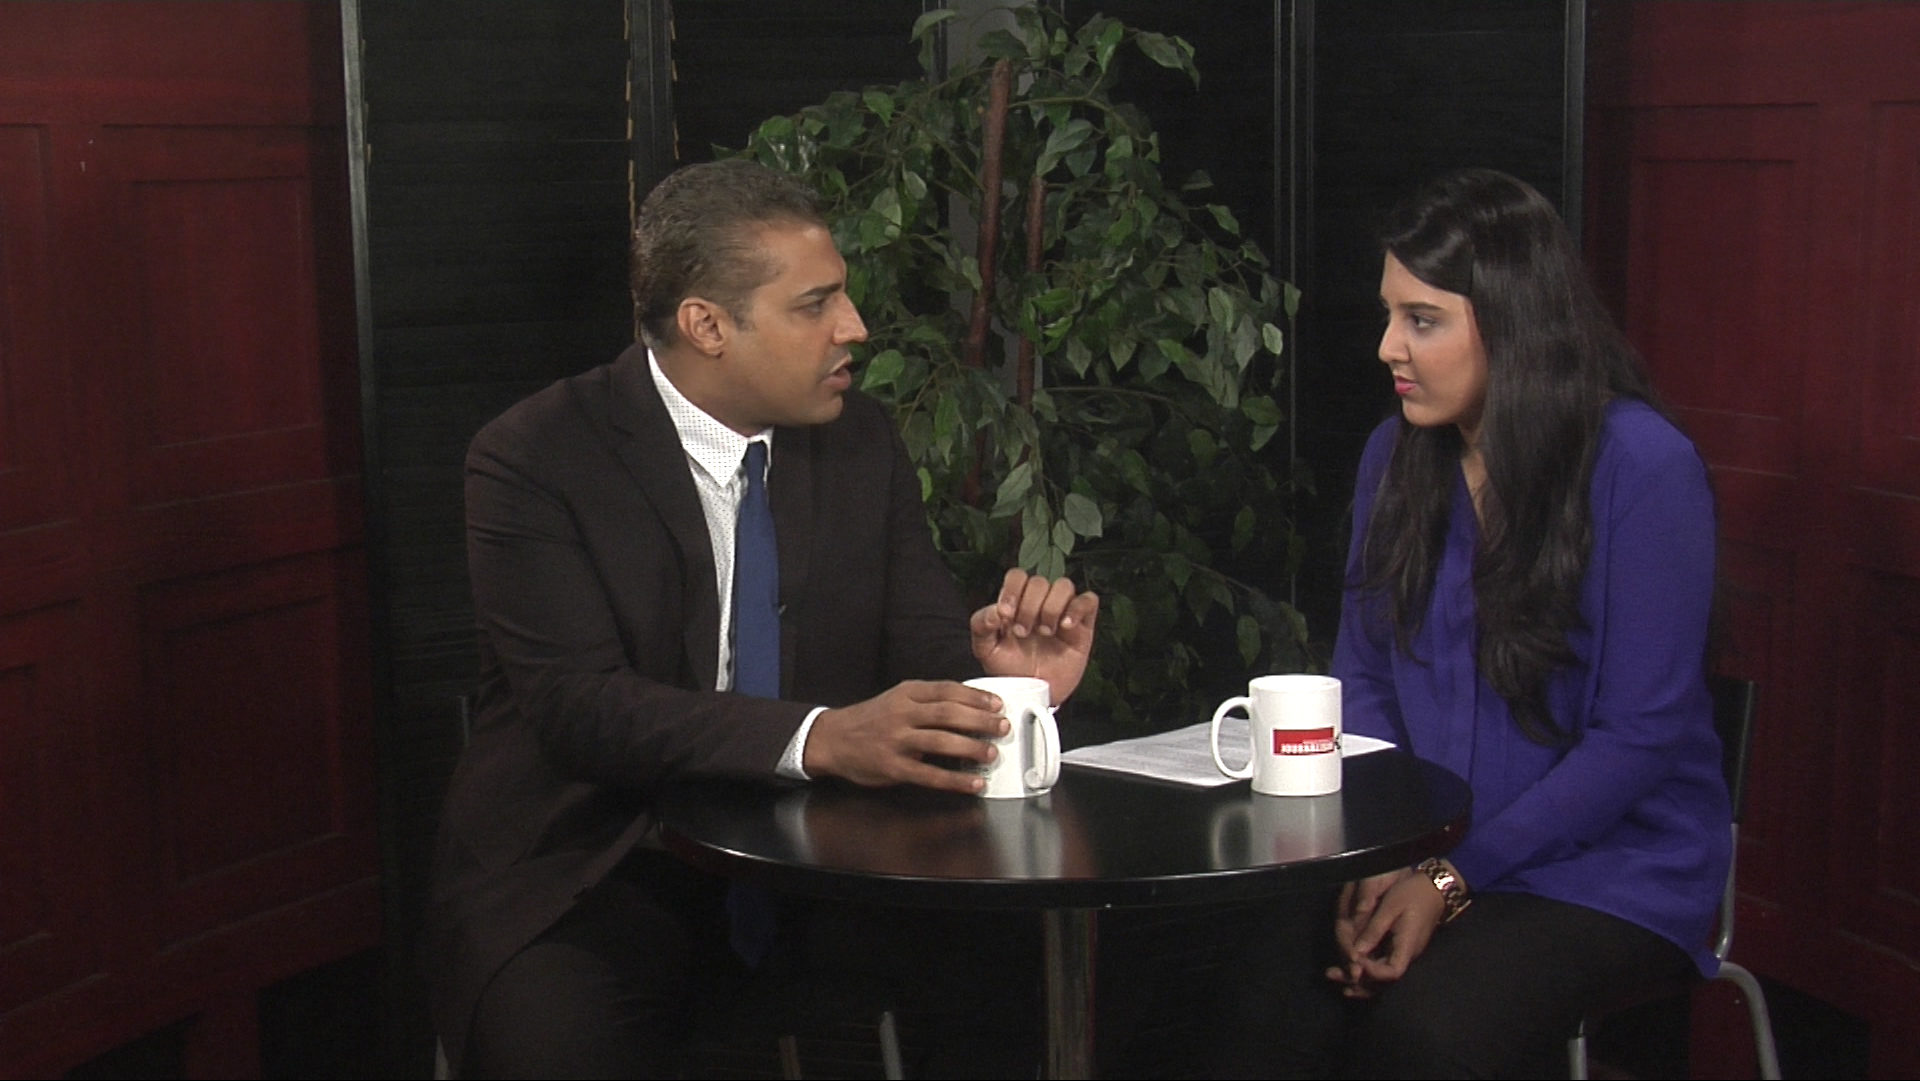 Fatima Syed interviews Mohamed Fahmy.